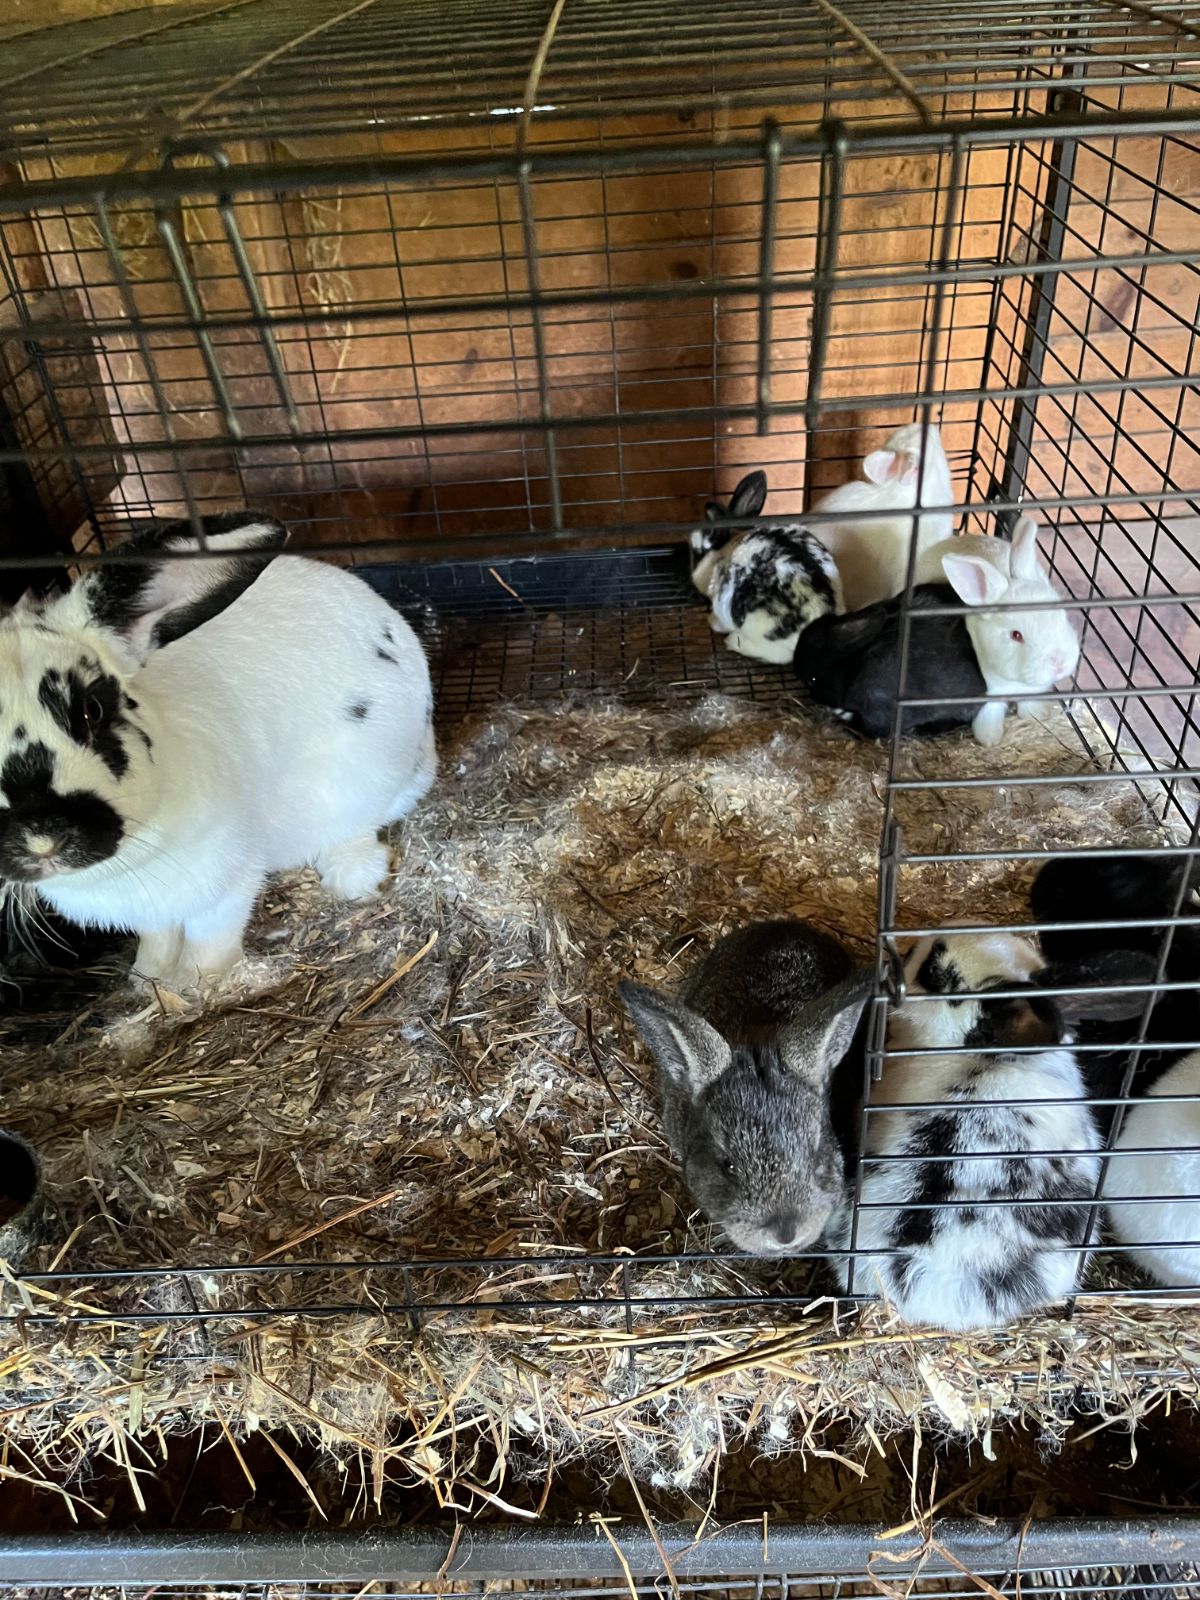 A doe rabbit with her litter of kits, several weeks old